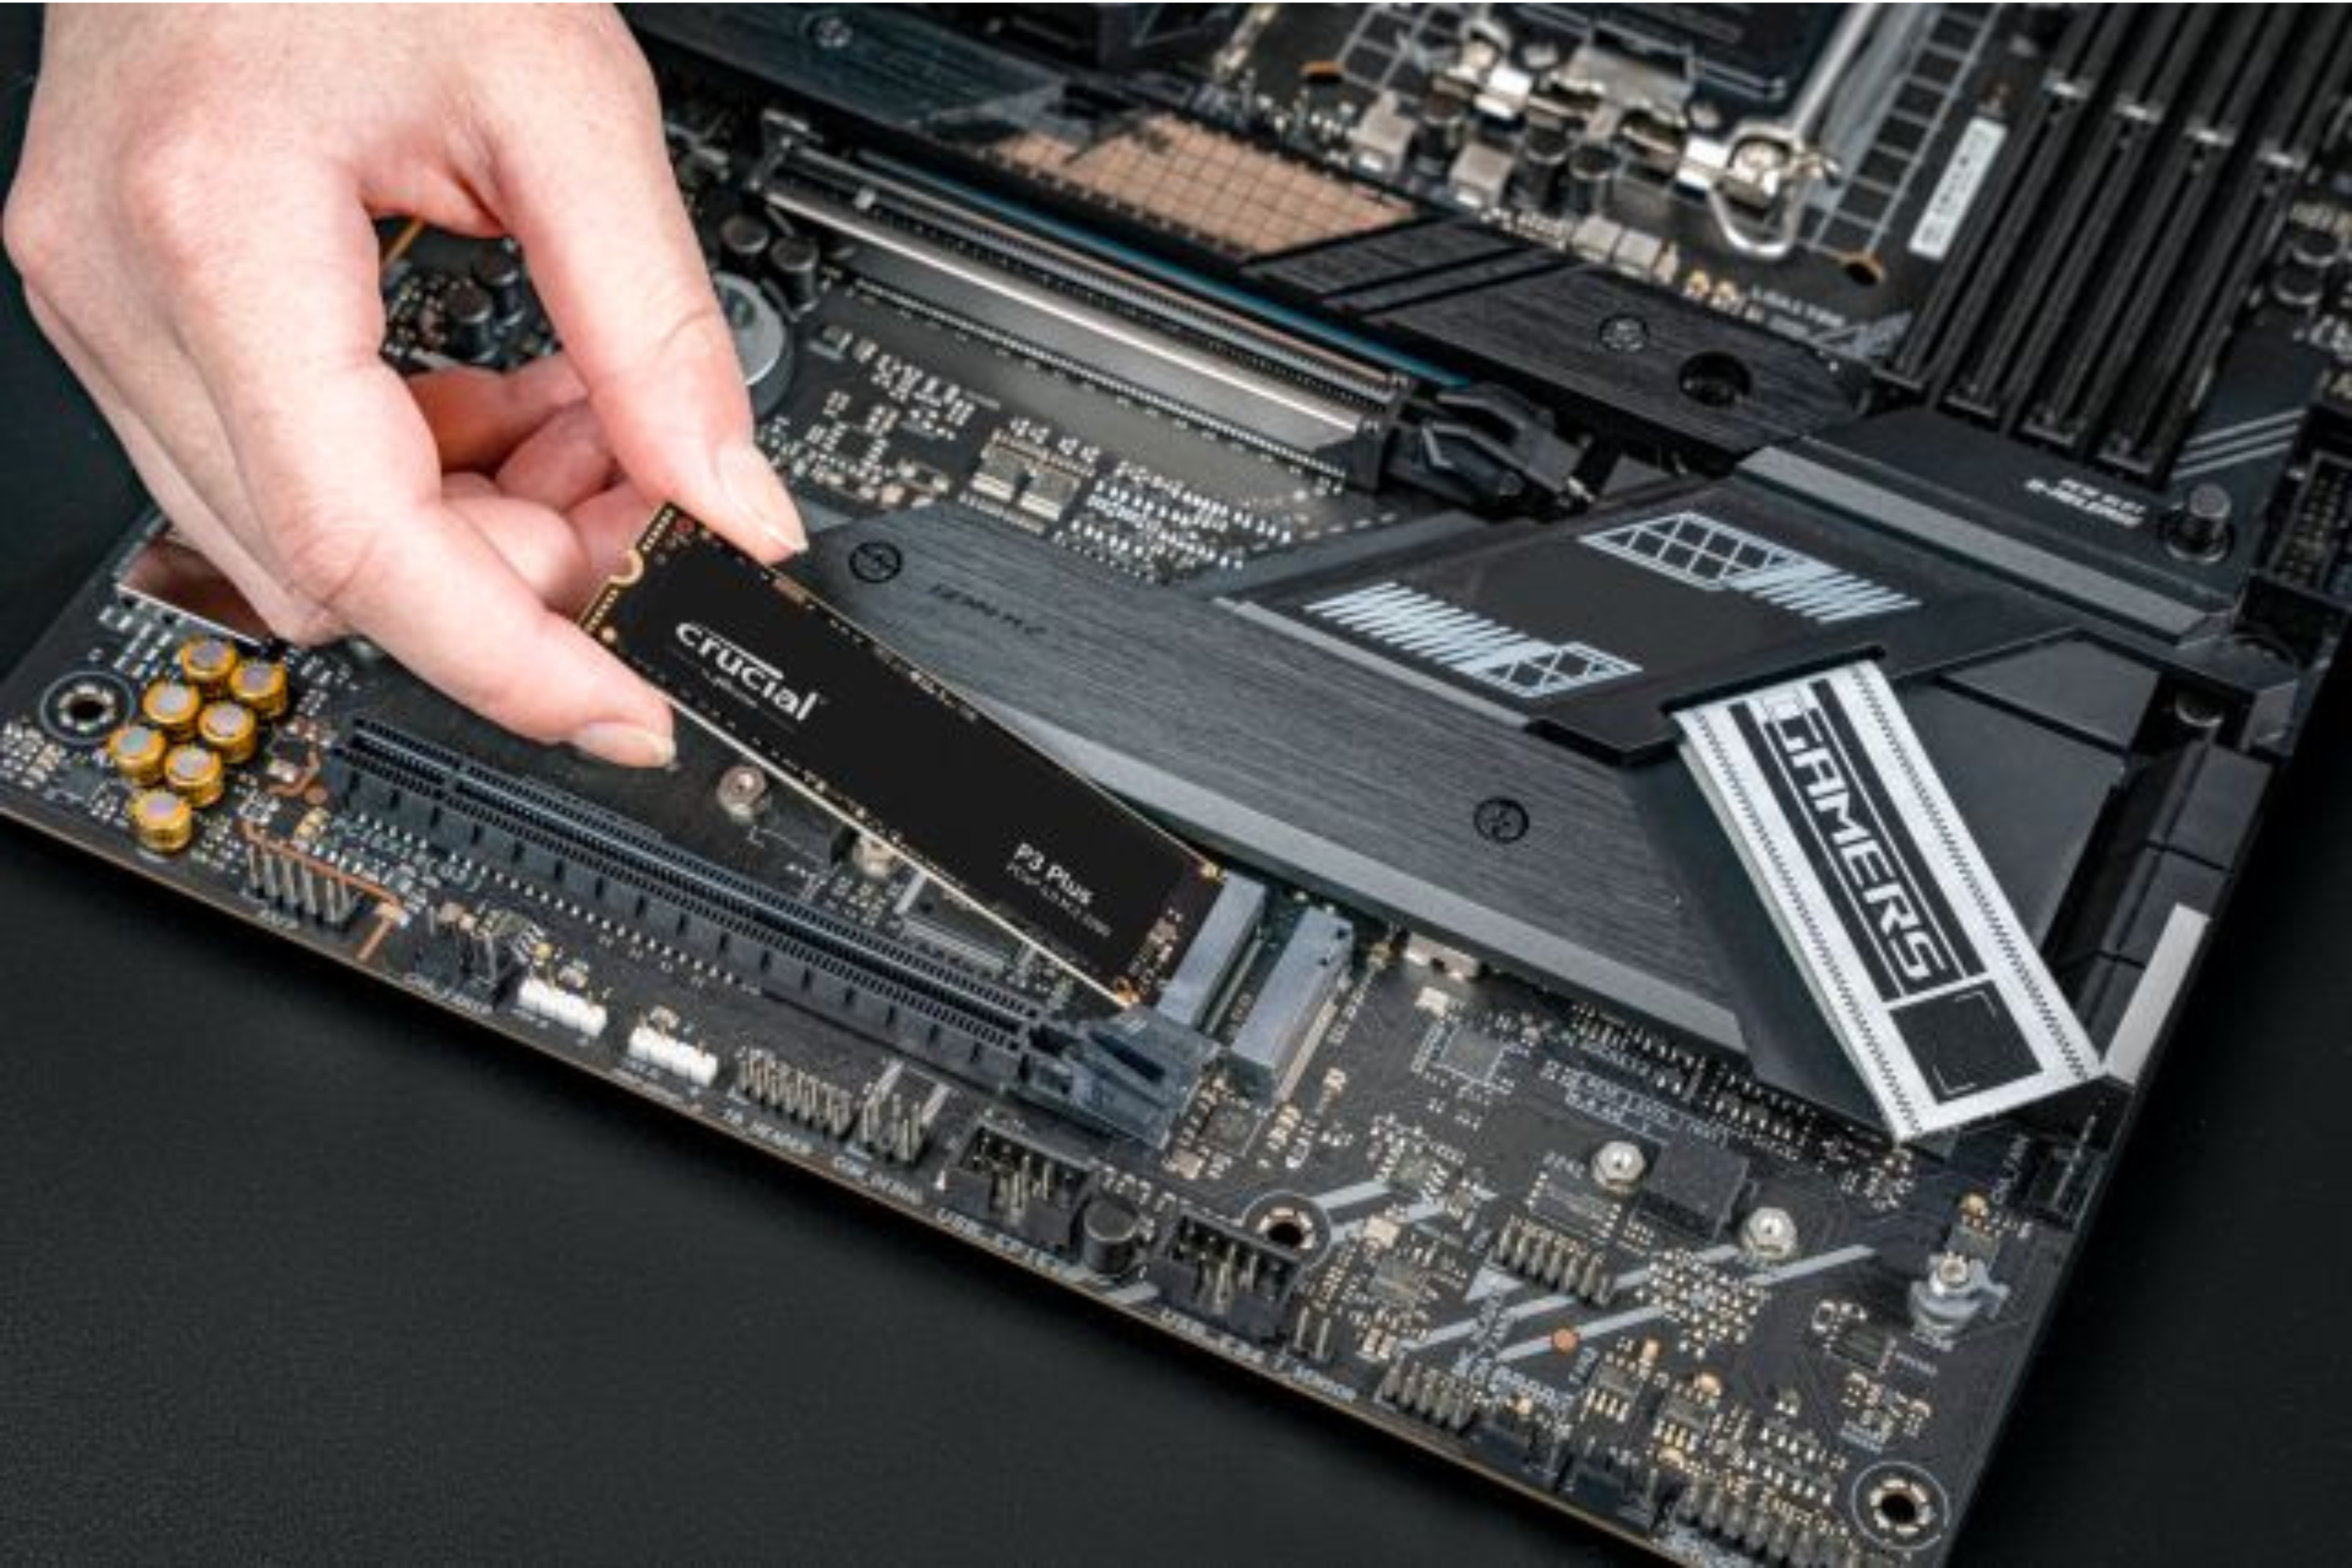 Crucial P3 Plus SSD being installed into a motherboard